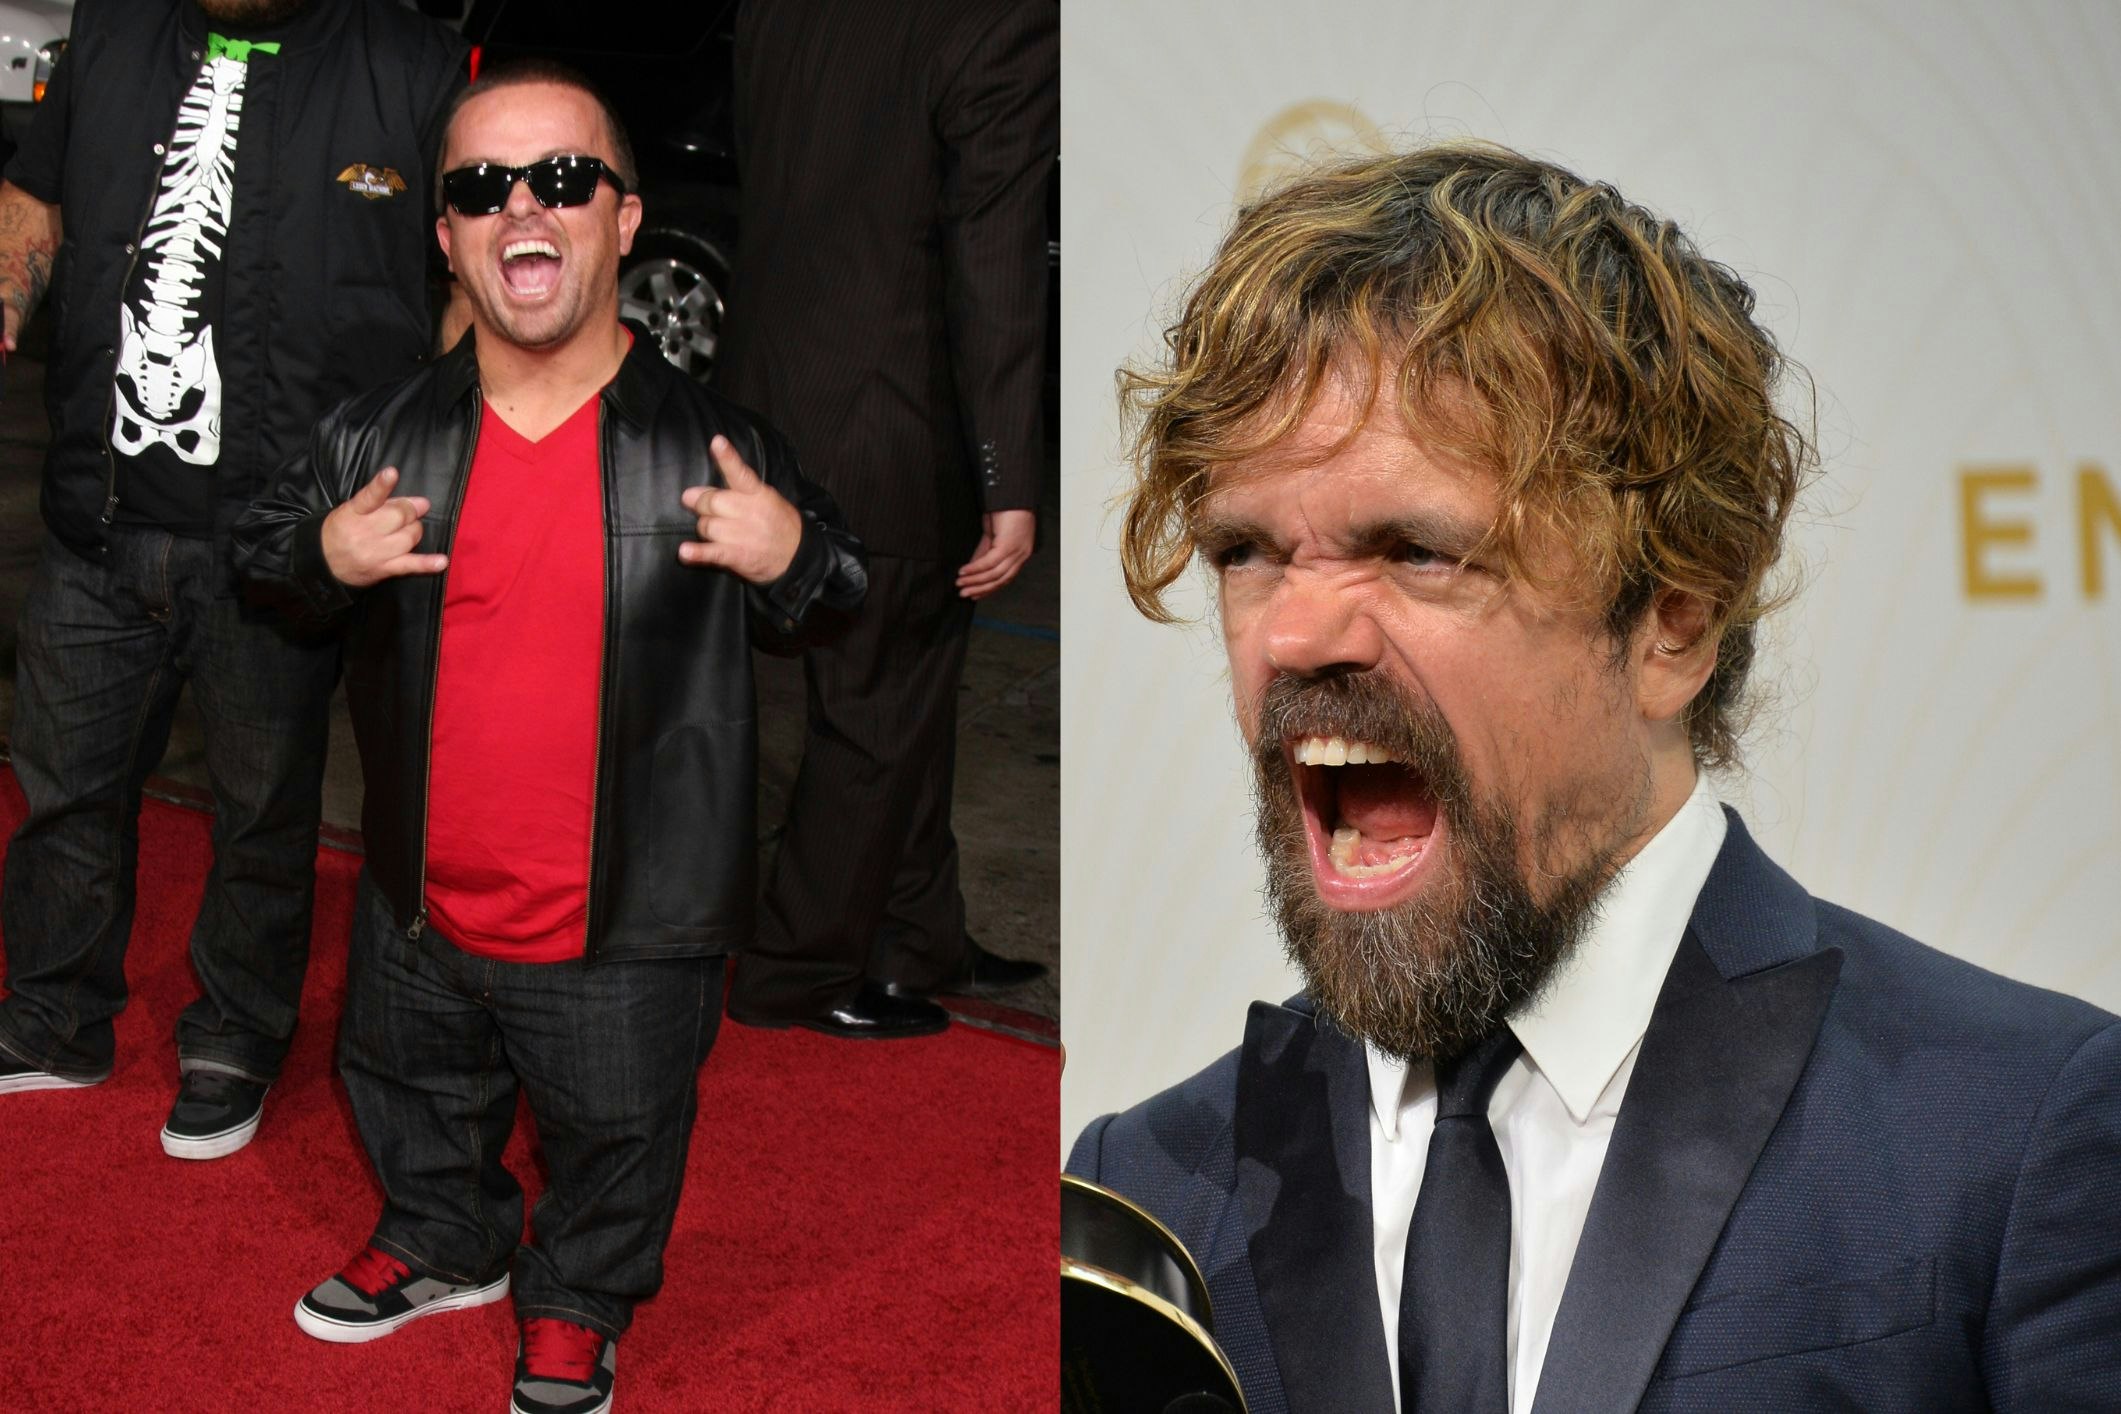 <p>Jackass star, Jason ‘Wee Man’ Acuña [left, credit: Kathy Hutchins] and Game of Thrones actor, Peter Dinklage, are among the film industry icons calling for authentic representation in media. [Source: Shutterstock]</p>
